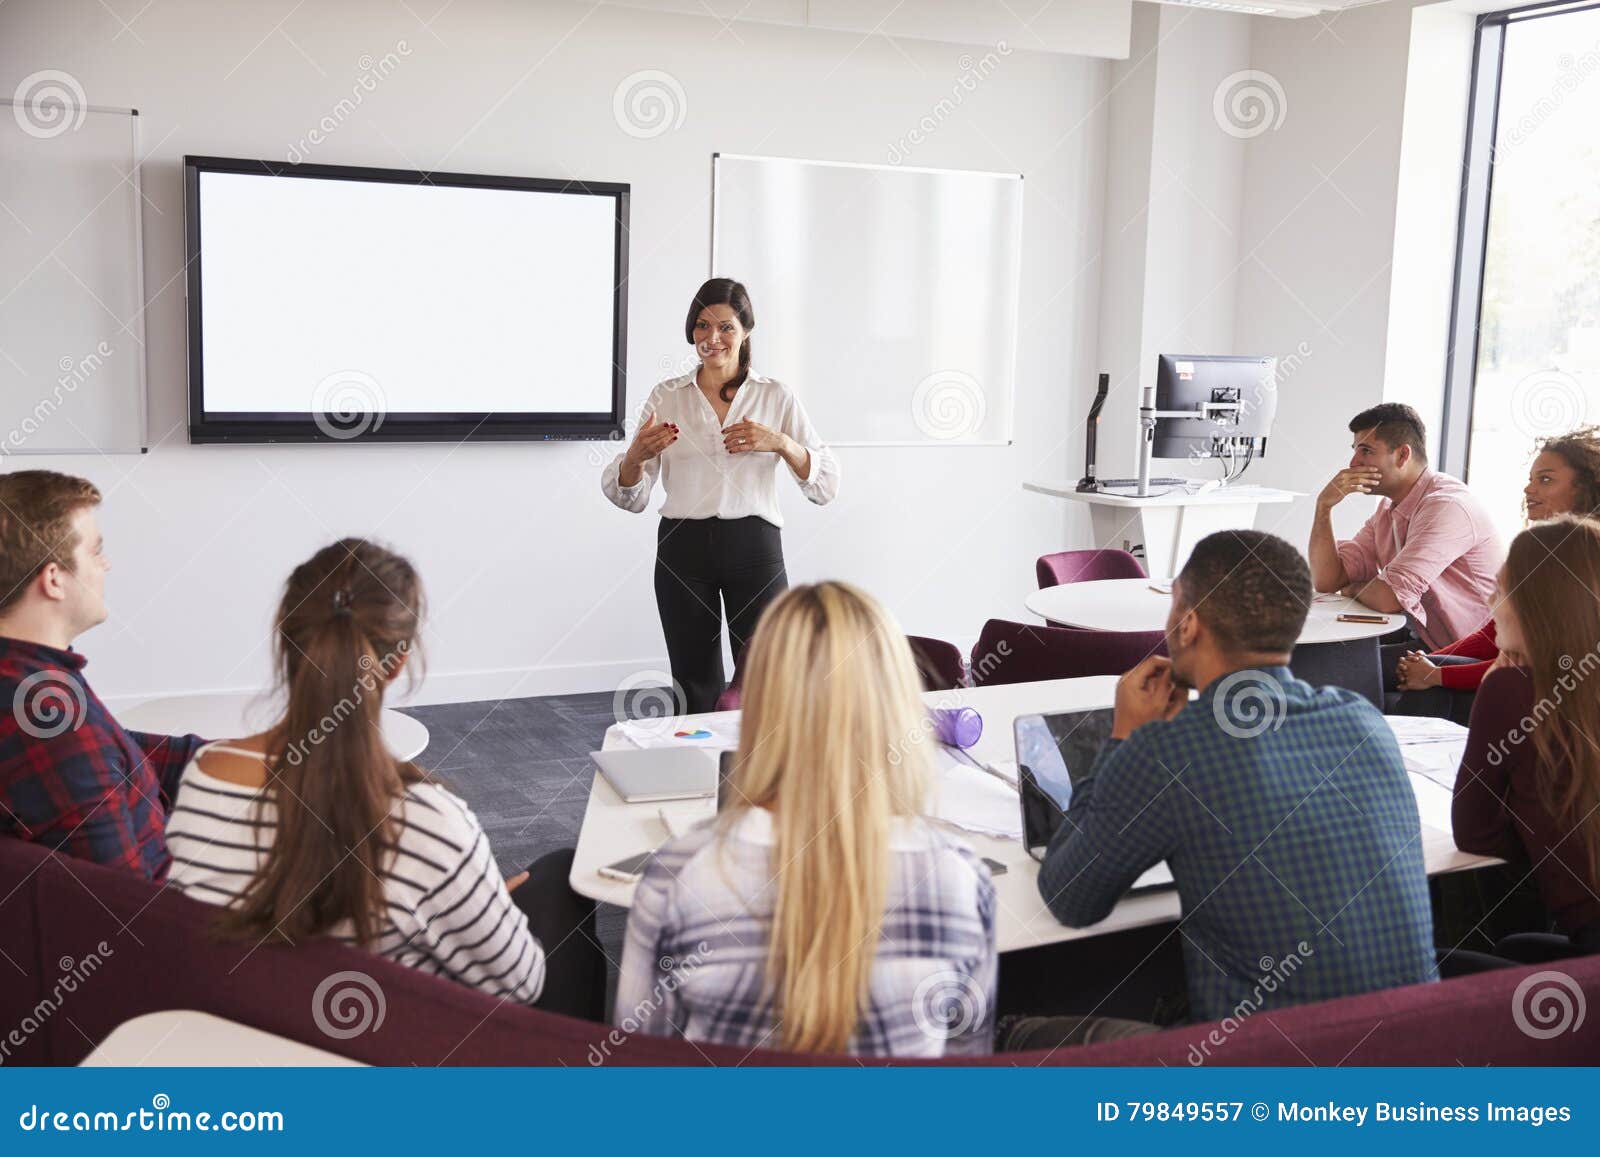 university students attending lecture on campus